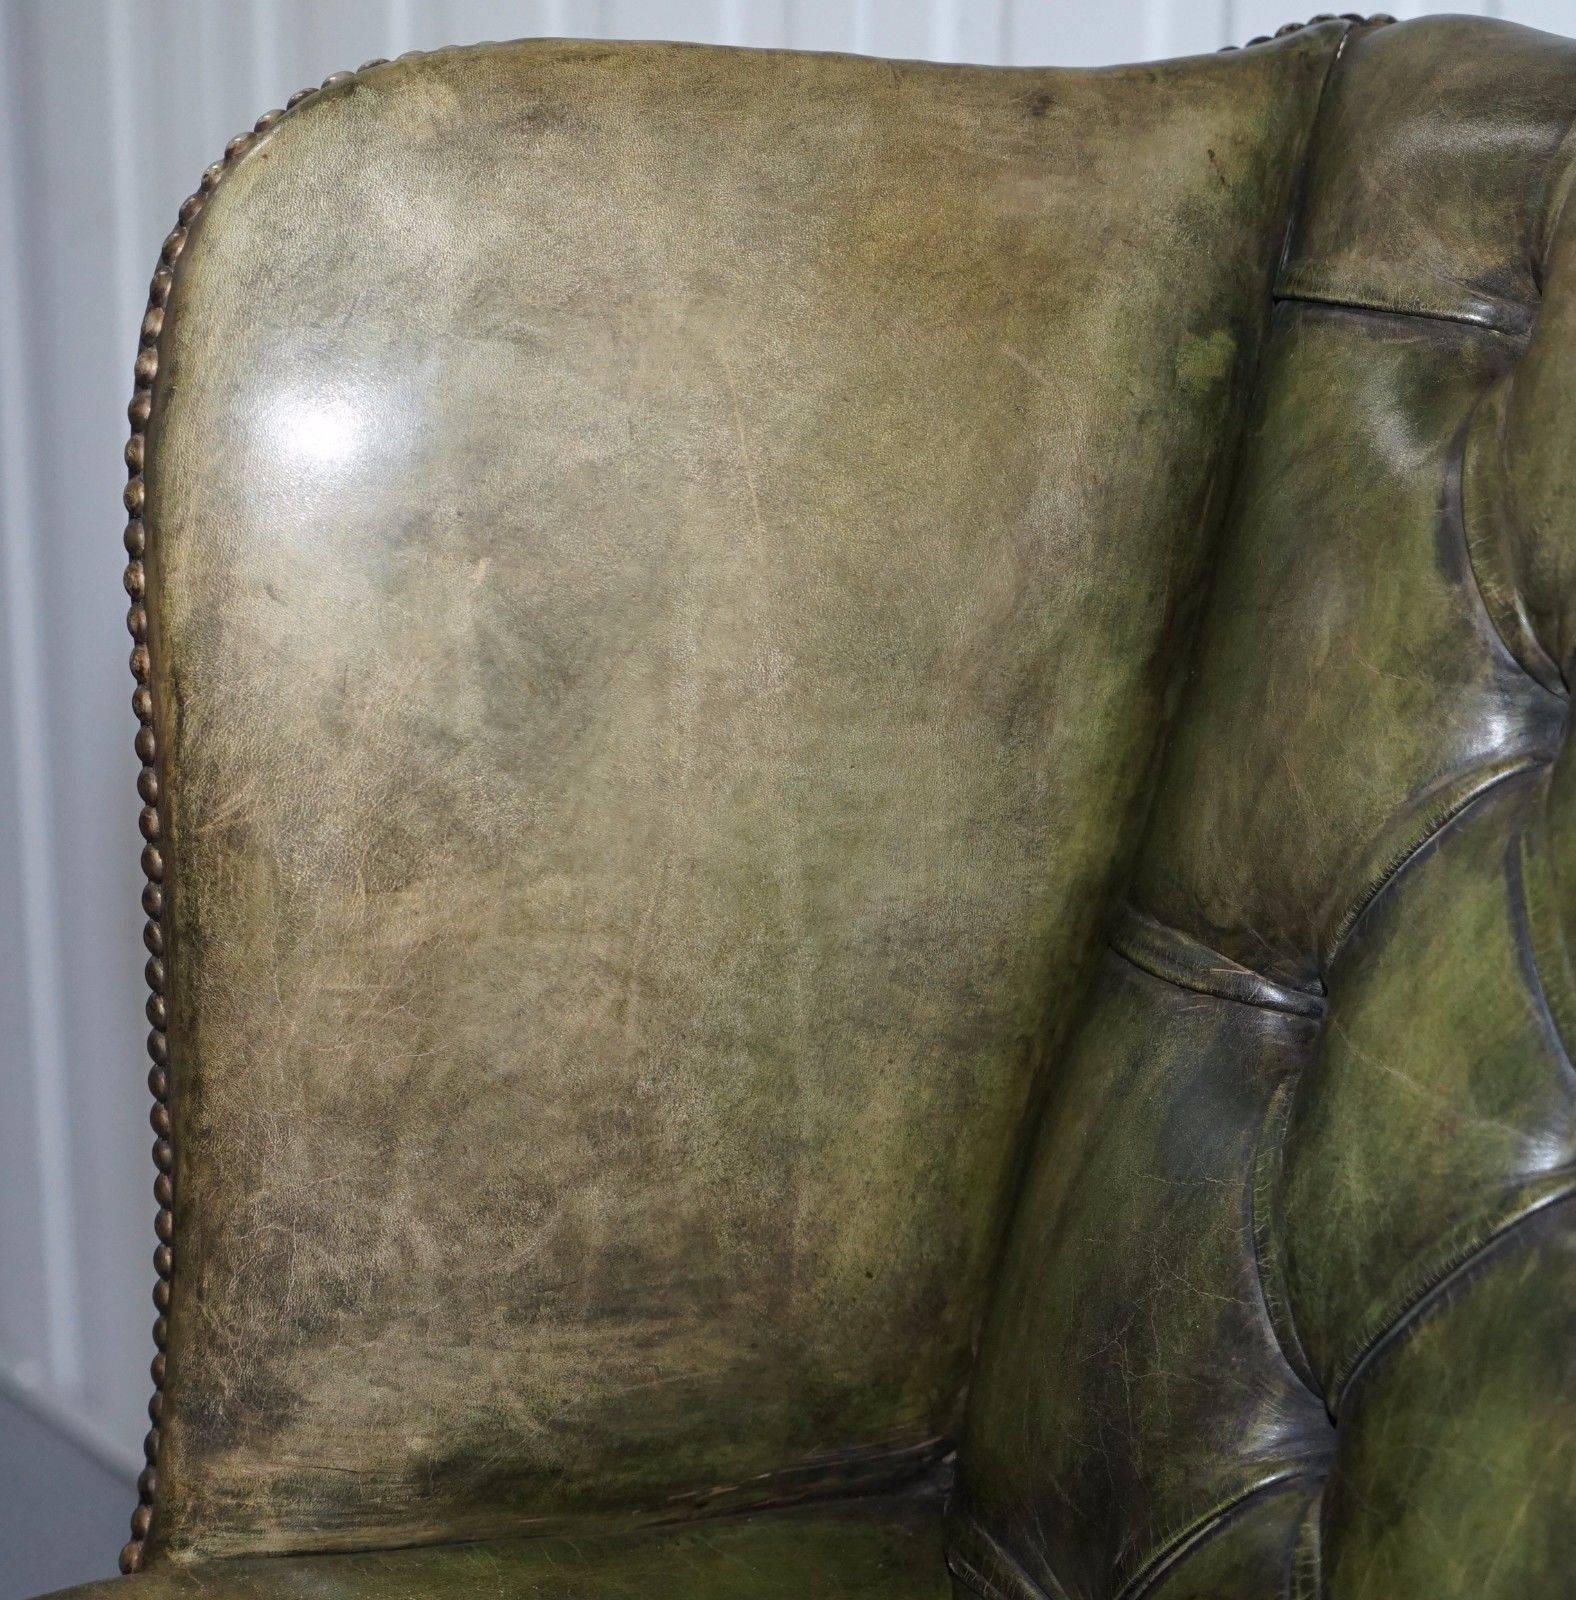 green leather wingback chair